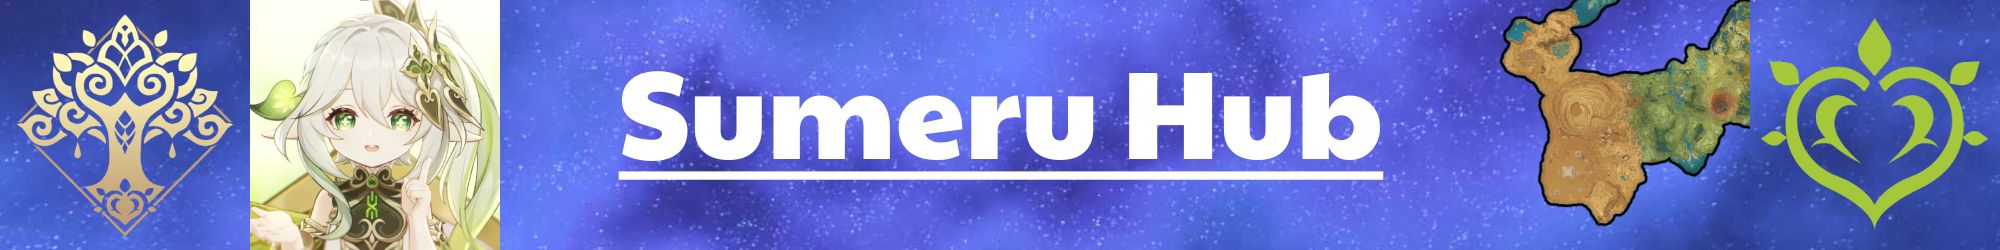 a narrow image with the text sumeru hub and pictures from sumeru: the region's emblem, nahida, a map of sumeru, and the dendro symbol - genshin impact